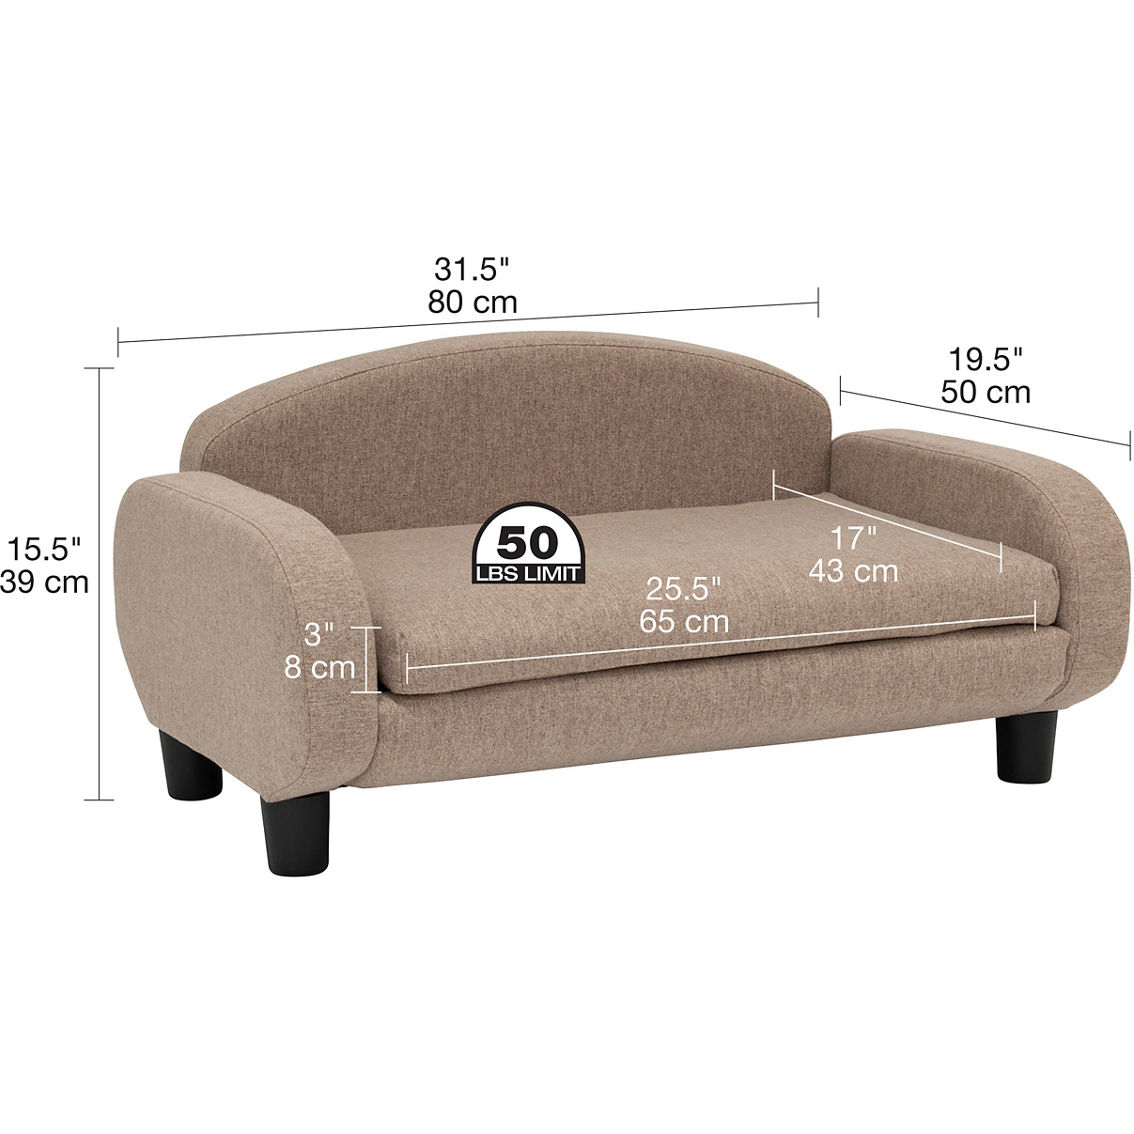 Studio Designs Paws and Purrs Pet Sofa Small - Image 9 of 9